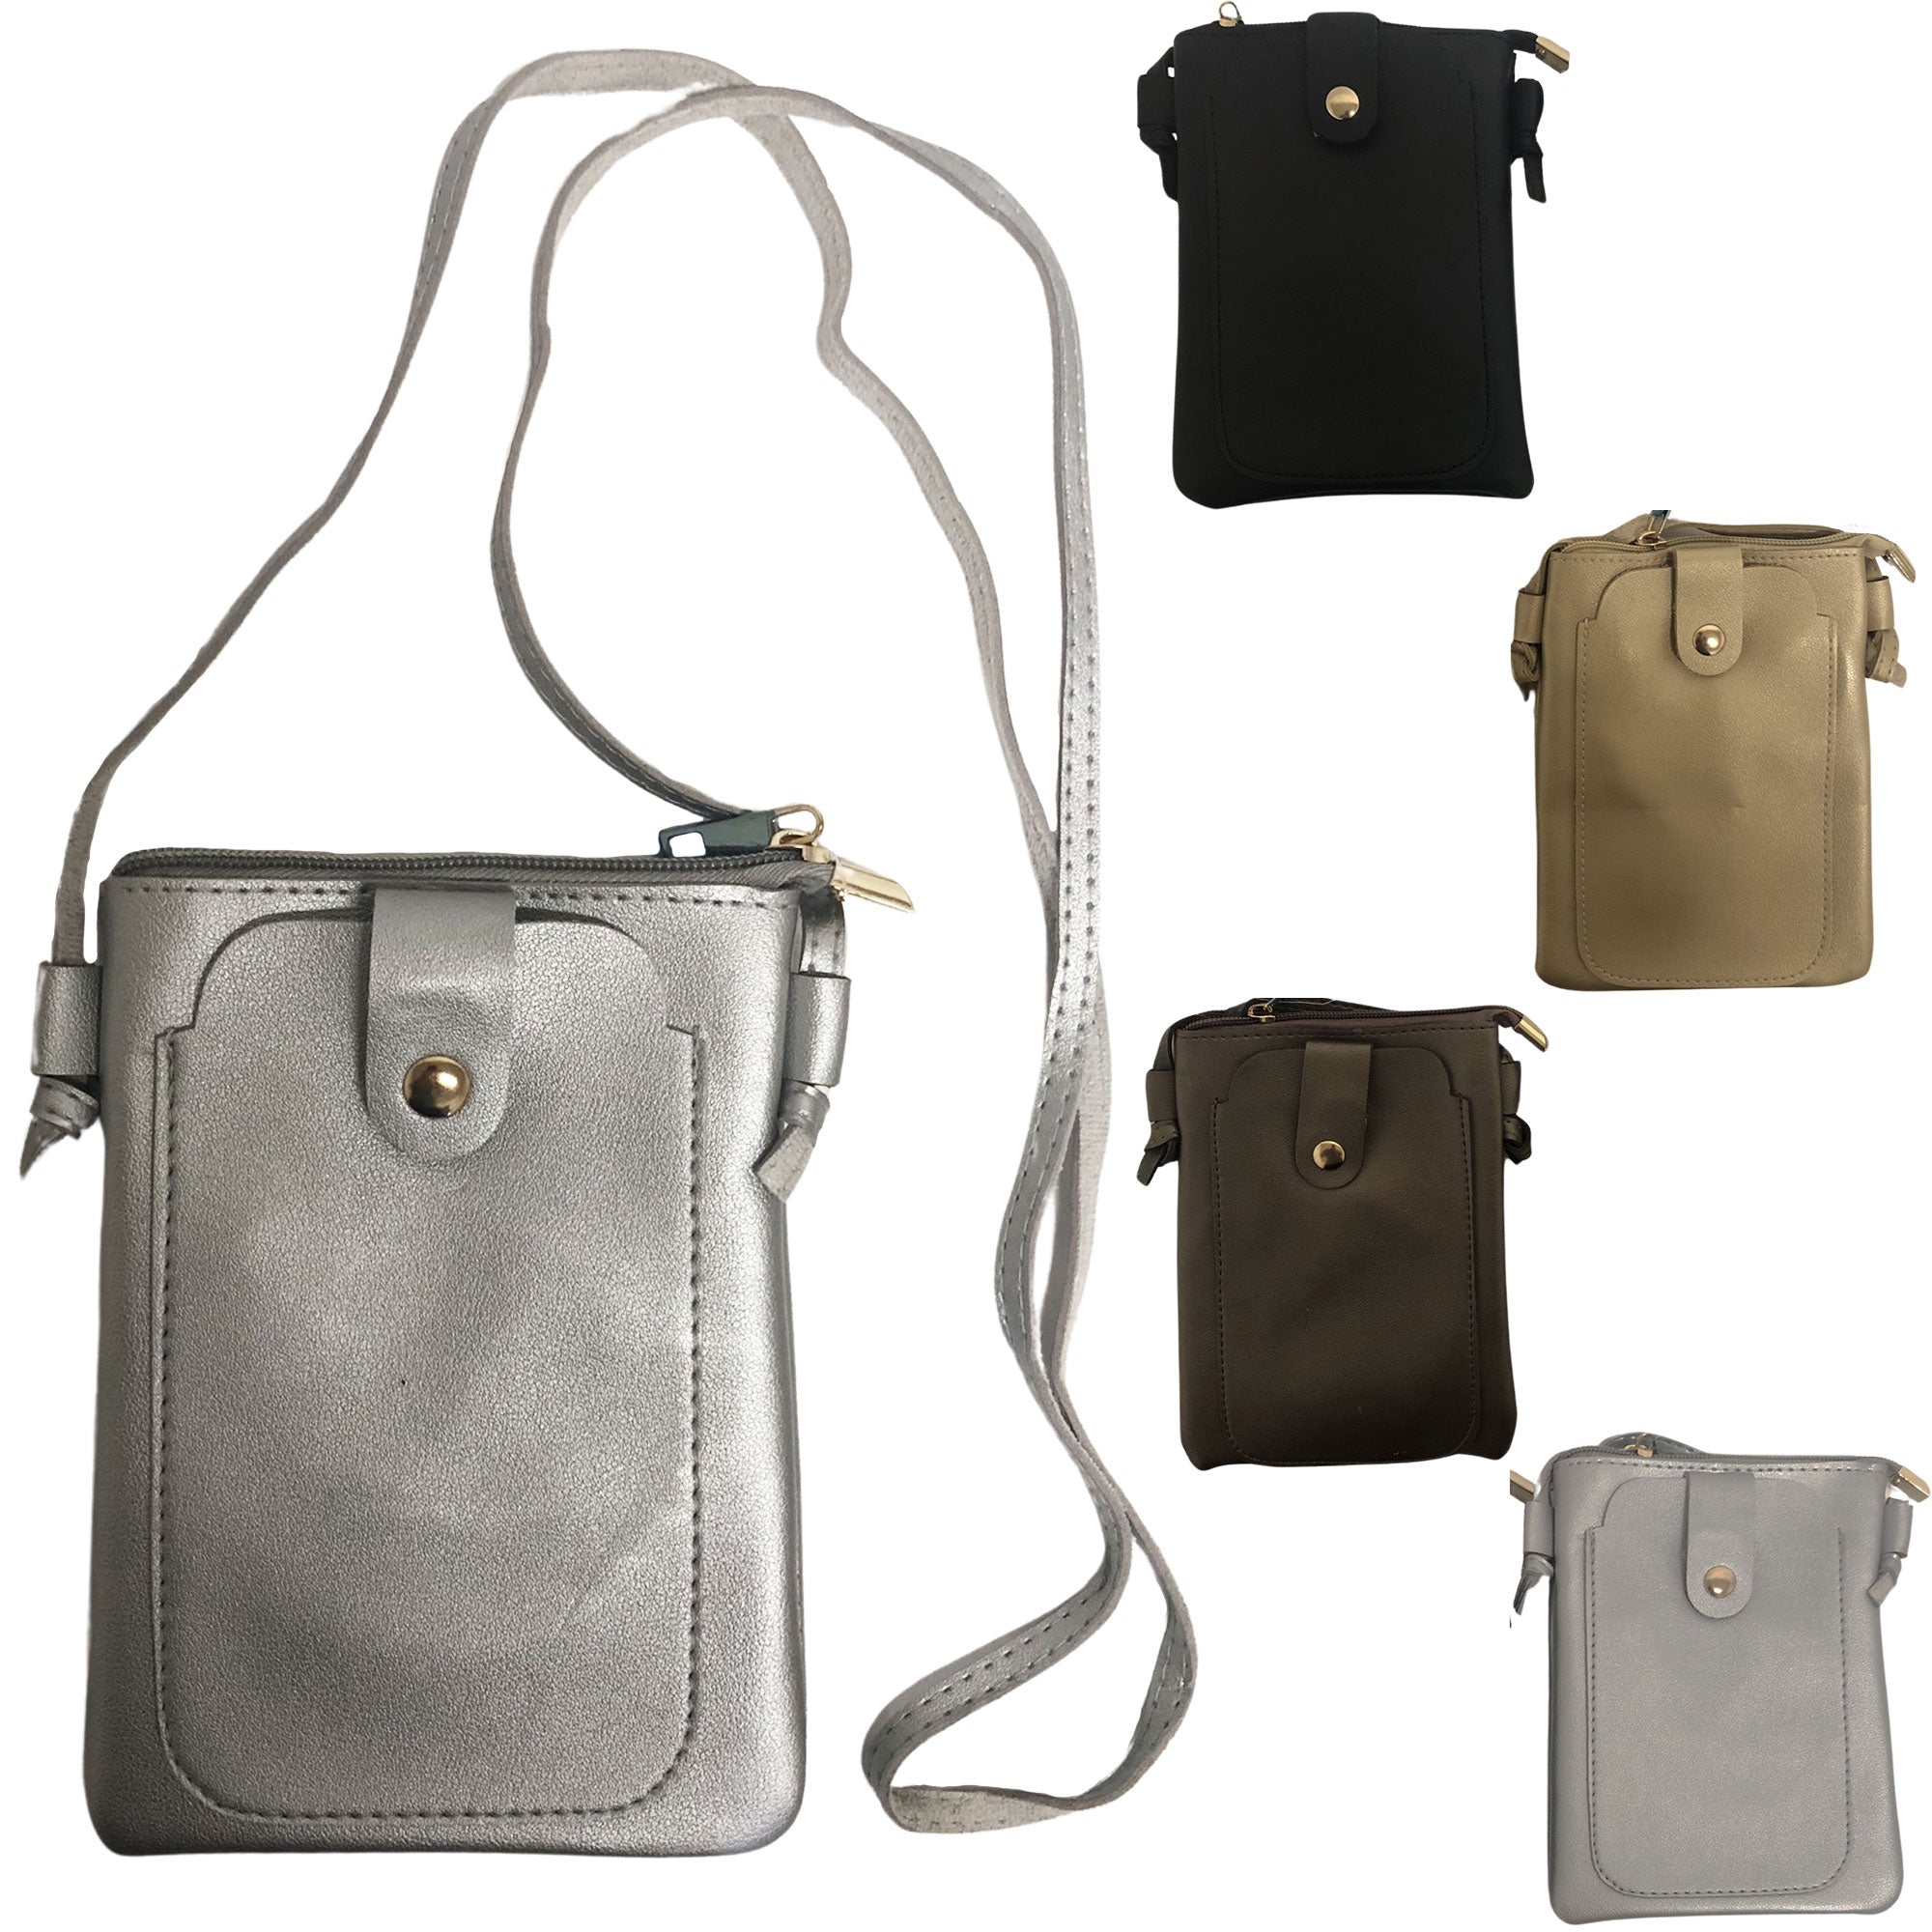 CLEARANCE CROSSBODY BAG FOR WOMEN (CASE OF 48 - $1.75 / PIECE)  Wholesale Crossbody Phone Bag in Assorted Colors SKU: M192-MET-48